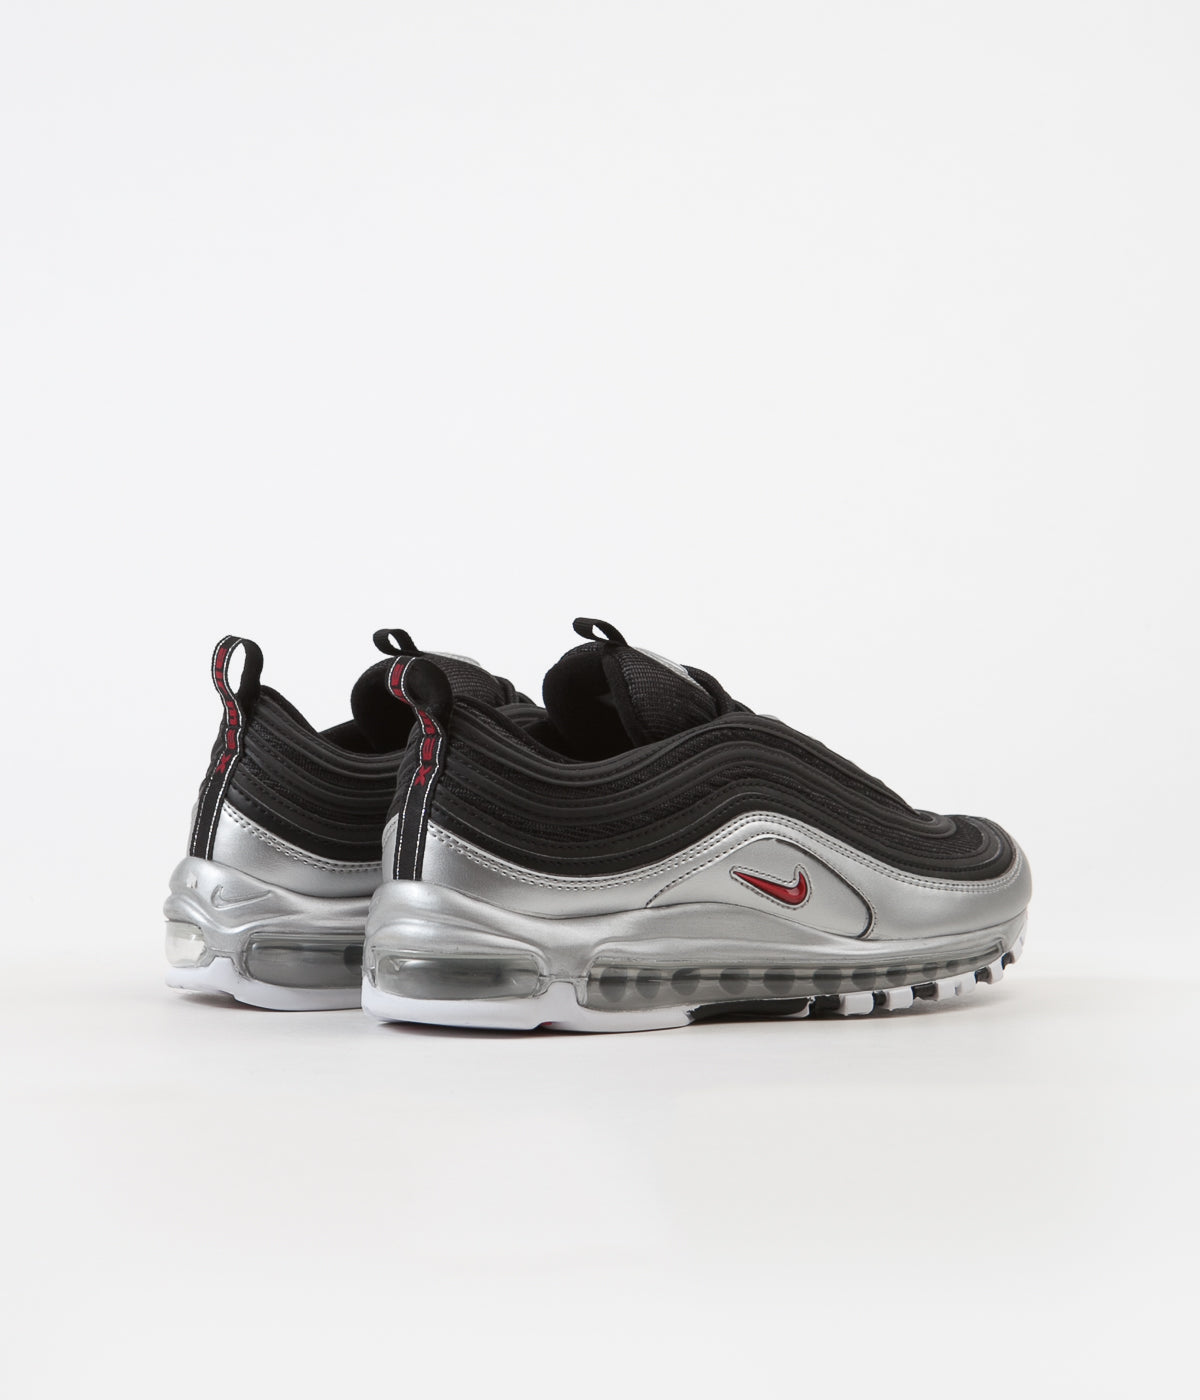 black 97 with red tick